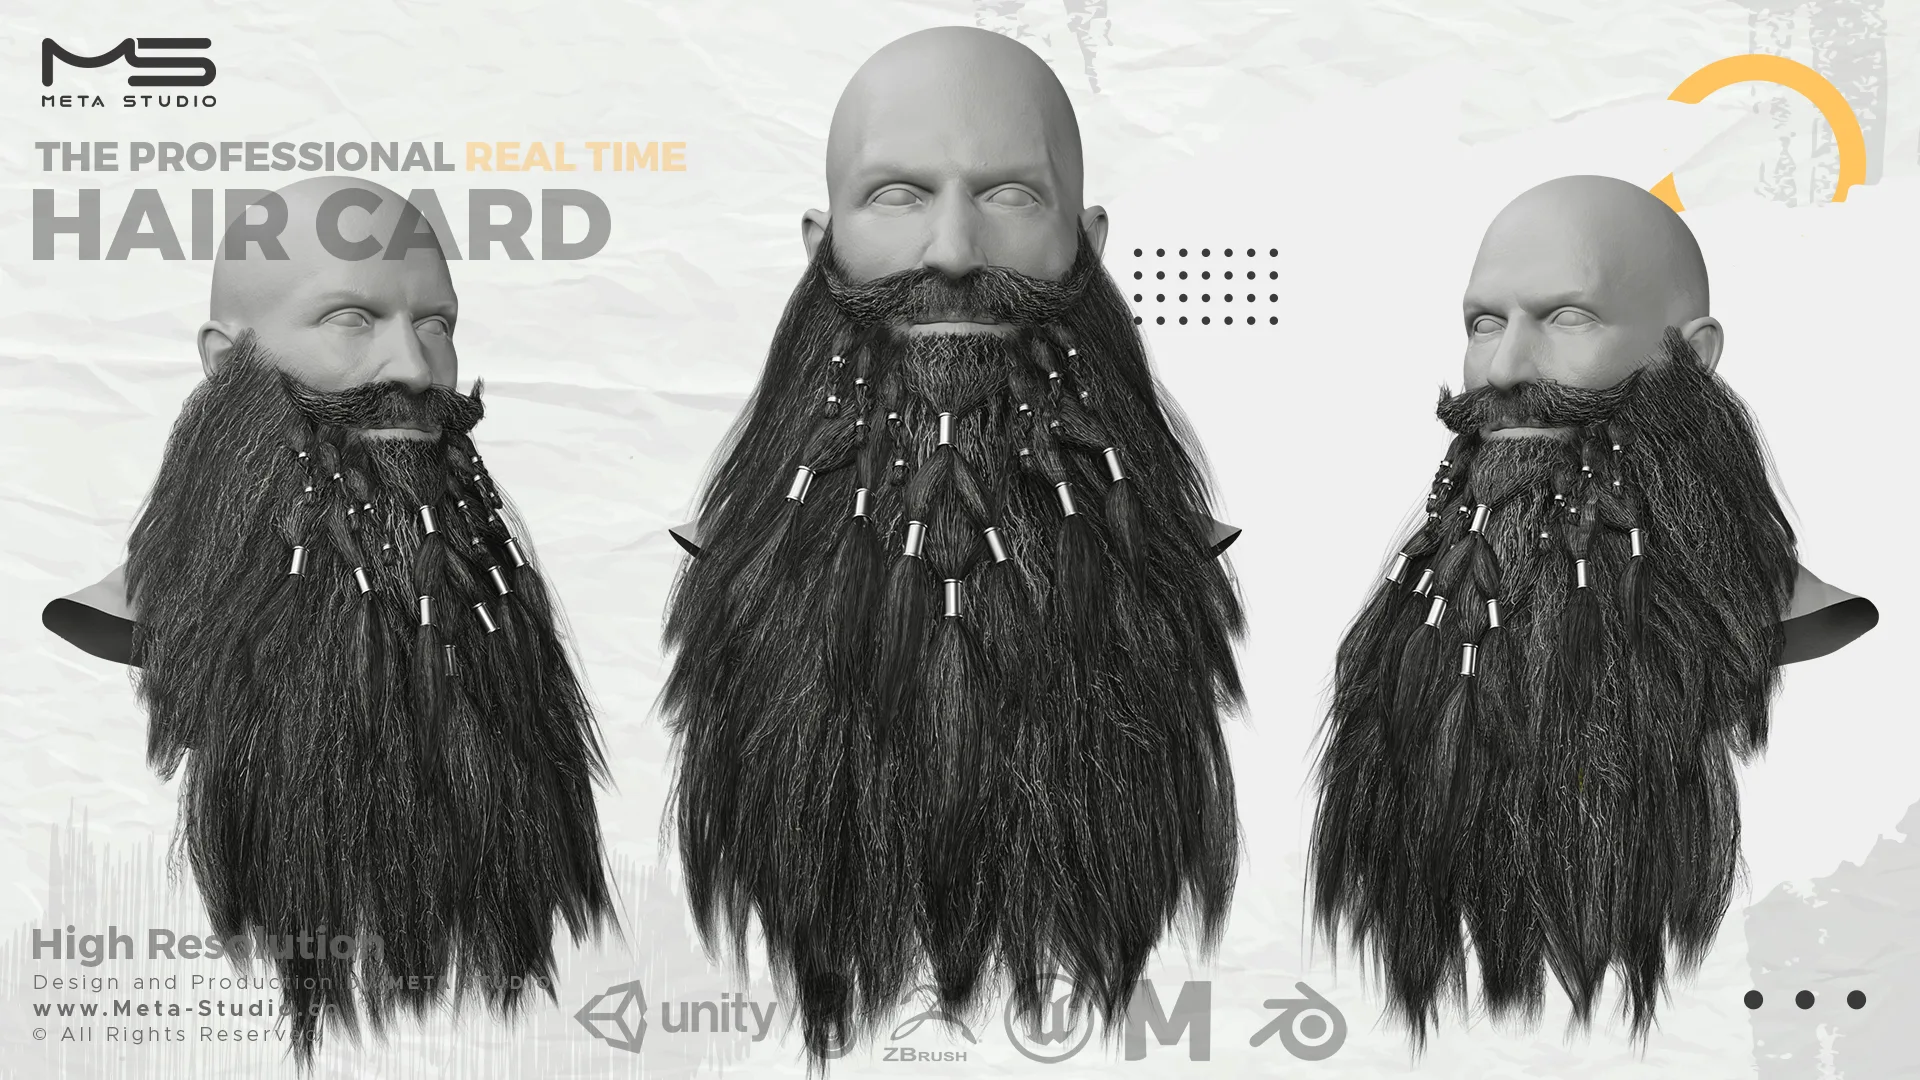 Beard and Mustache Part 7 - Professional Realtime Hair card